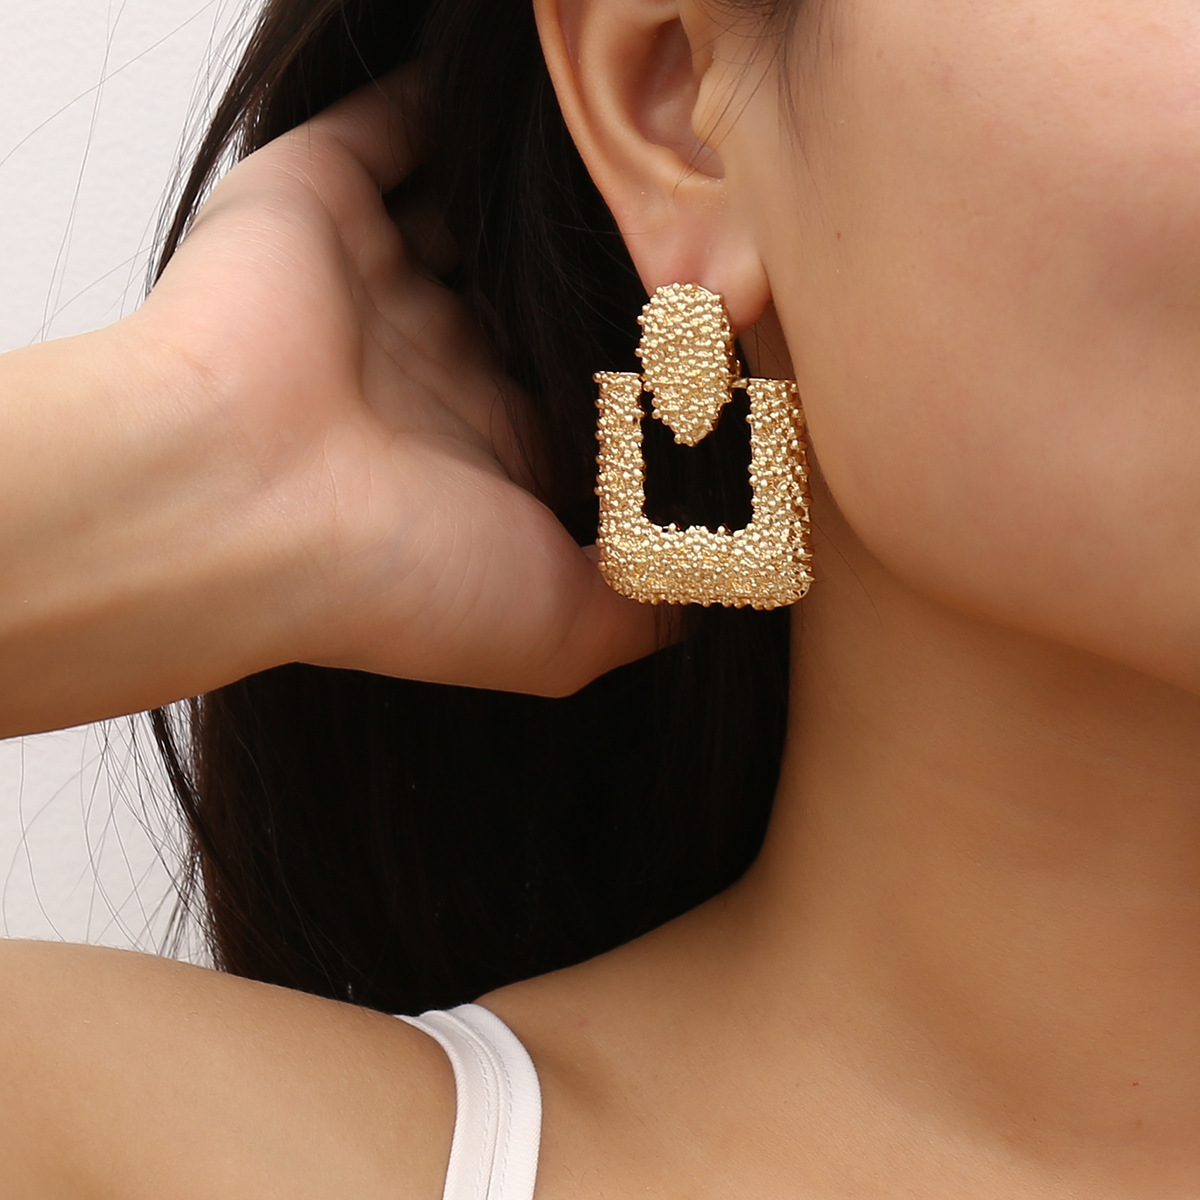 Vintage Alloy Square Earrings